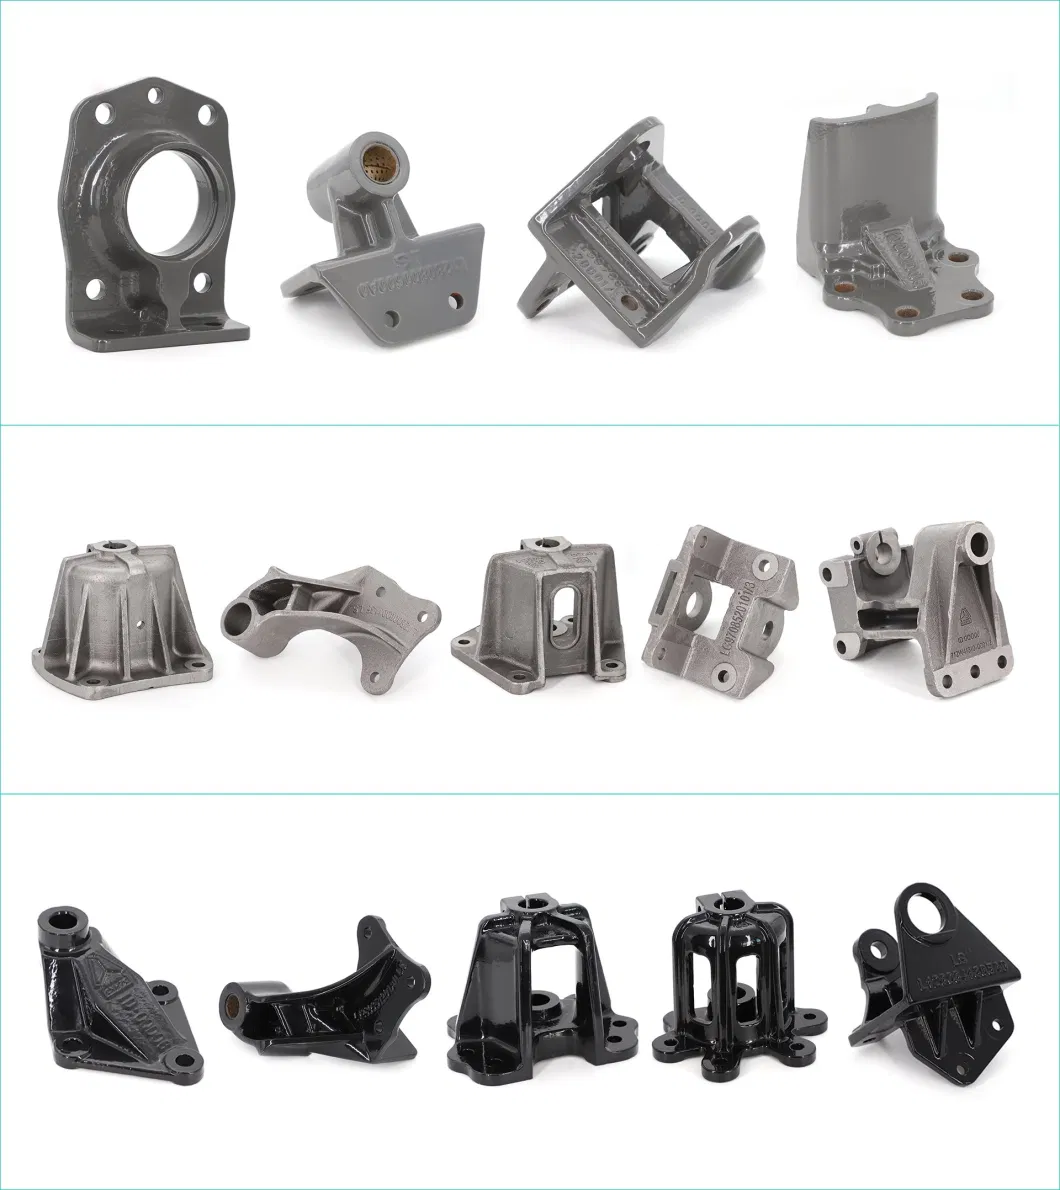 OEM Tractor/Trailer/Valve/Pump/Gearbox/Vehicle/Heavy/Light Truck Support/Spring Bracket/Arm/Housing/Motor/Engine Gray/Grey/Ductile Iron Sand Casting Parts